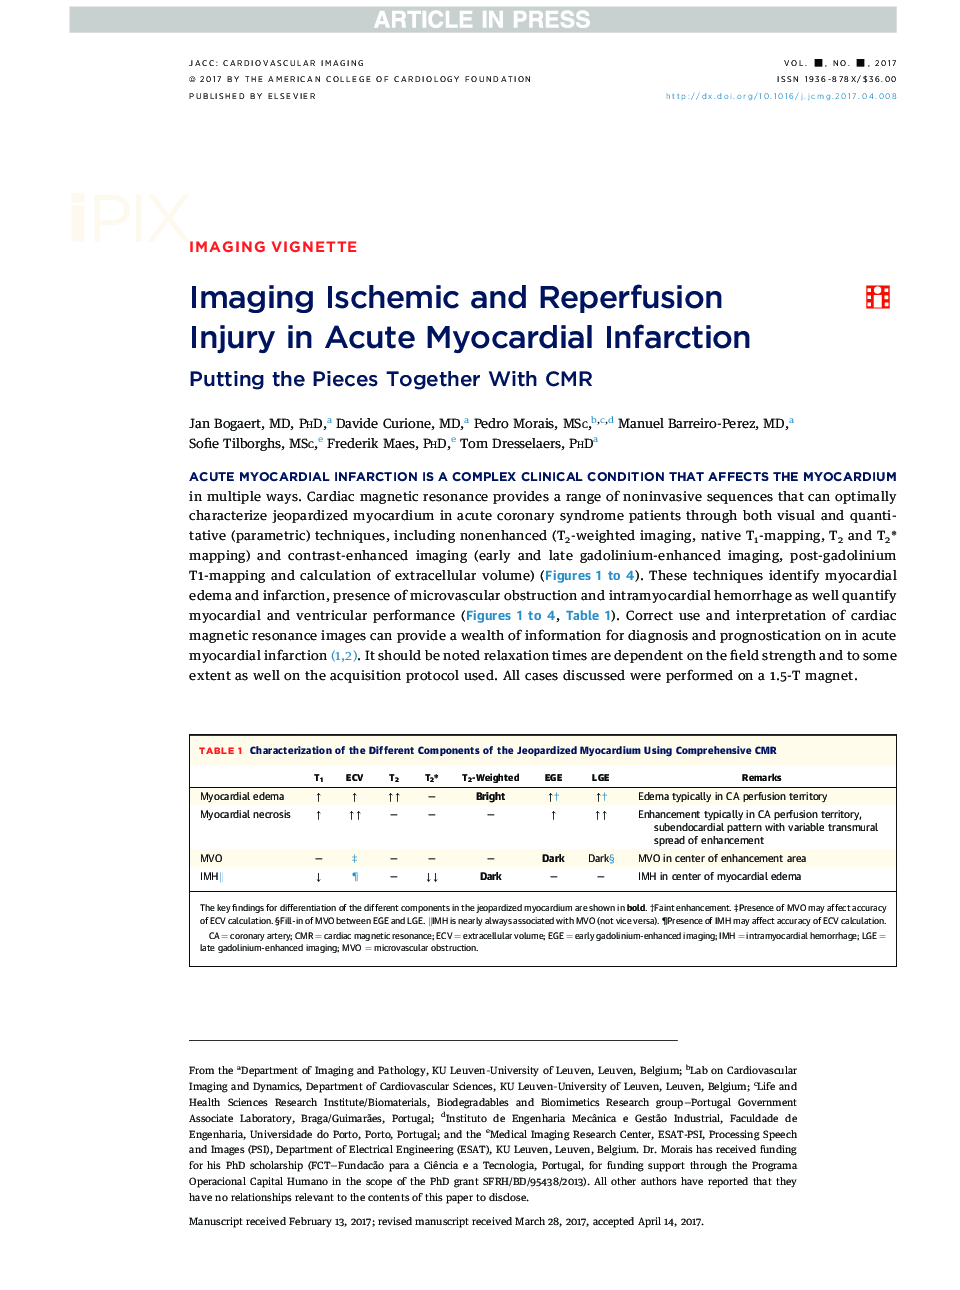 Imaging Ischemic and Reperfusion Injury in Acute Myocardial Infarction